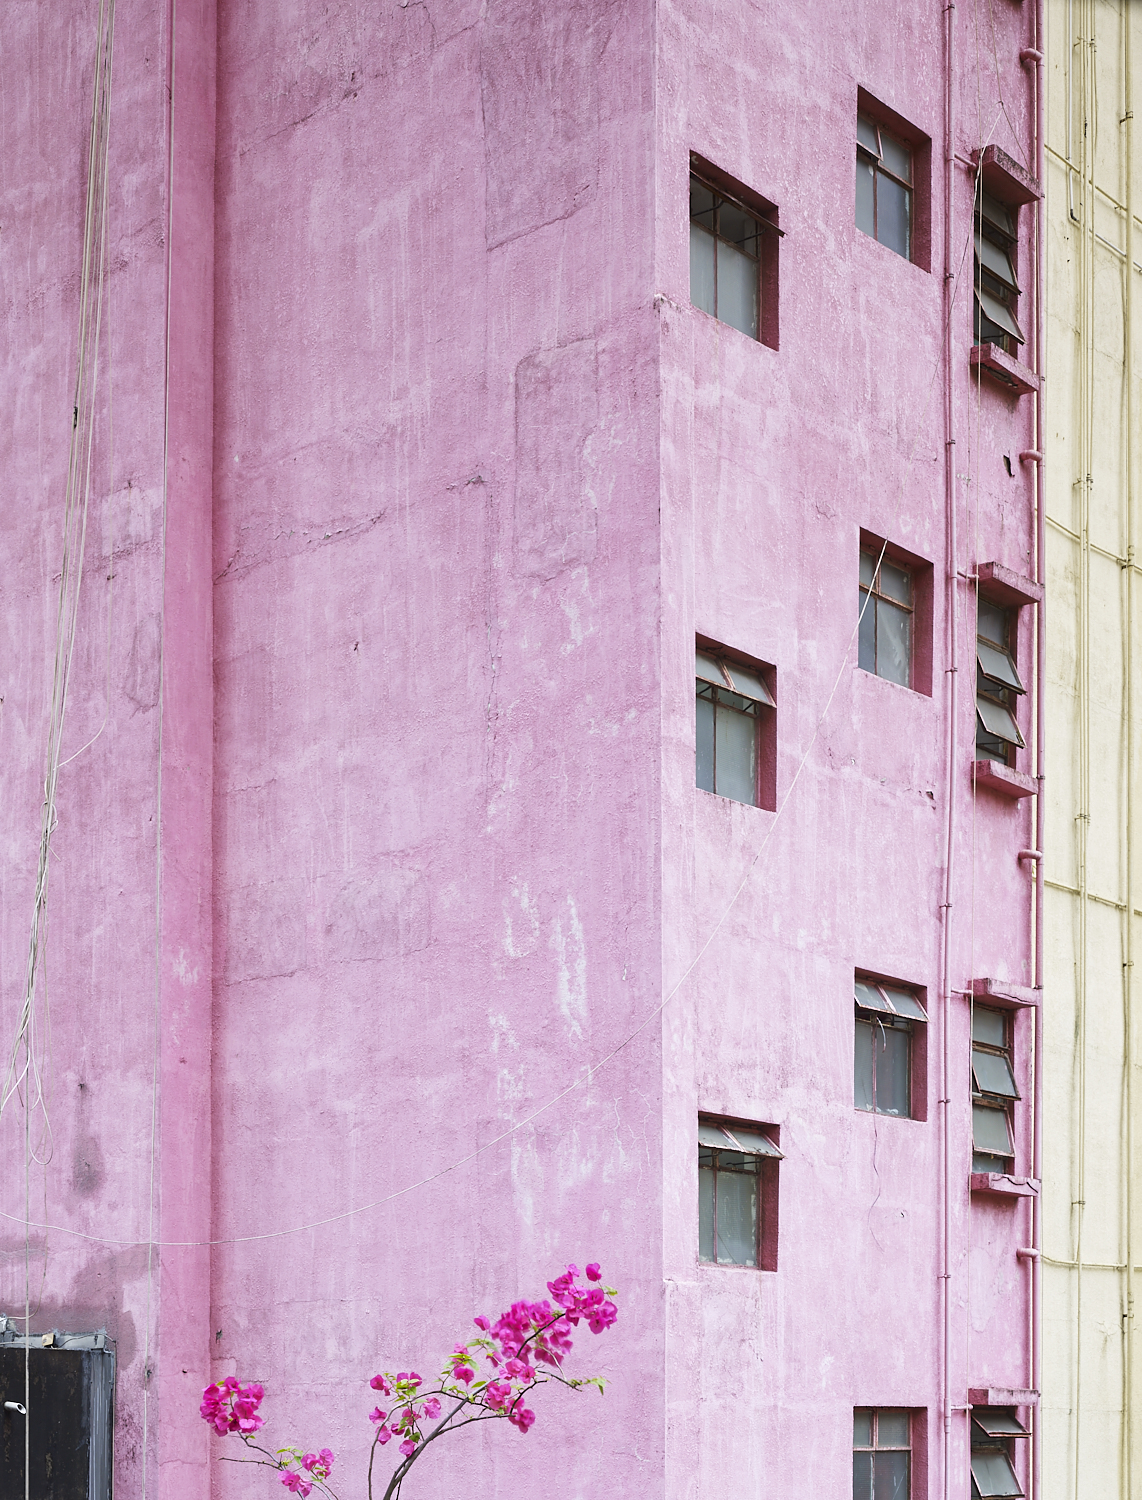  Flower and building, Central Hong Kong, 2017 